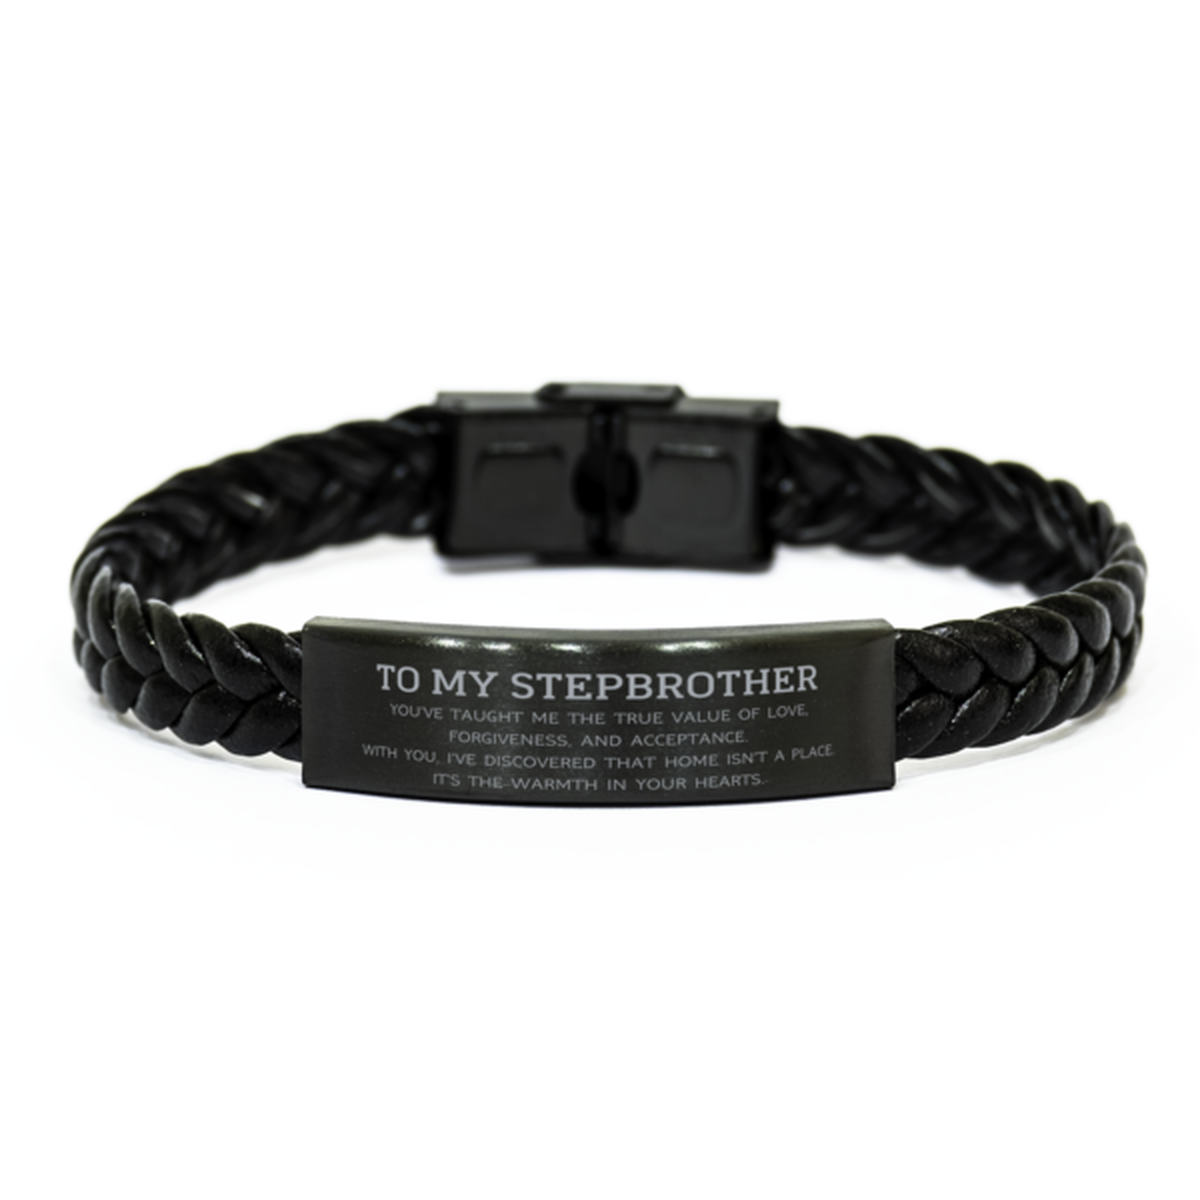 To My Stepbrother Gifts, You've taught me the true value of love, Thank You Gifts For Stepbrother, Birthday Braided Leather Bracelet For Stepbrother